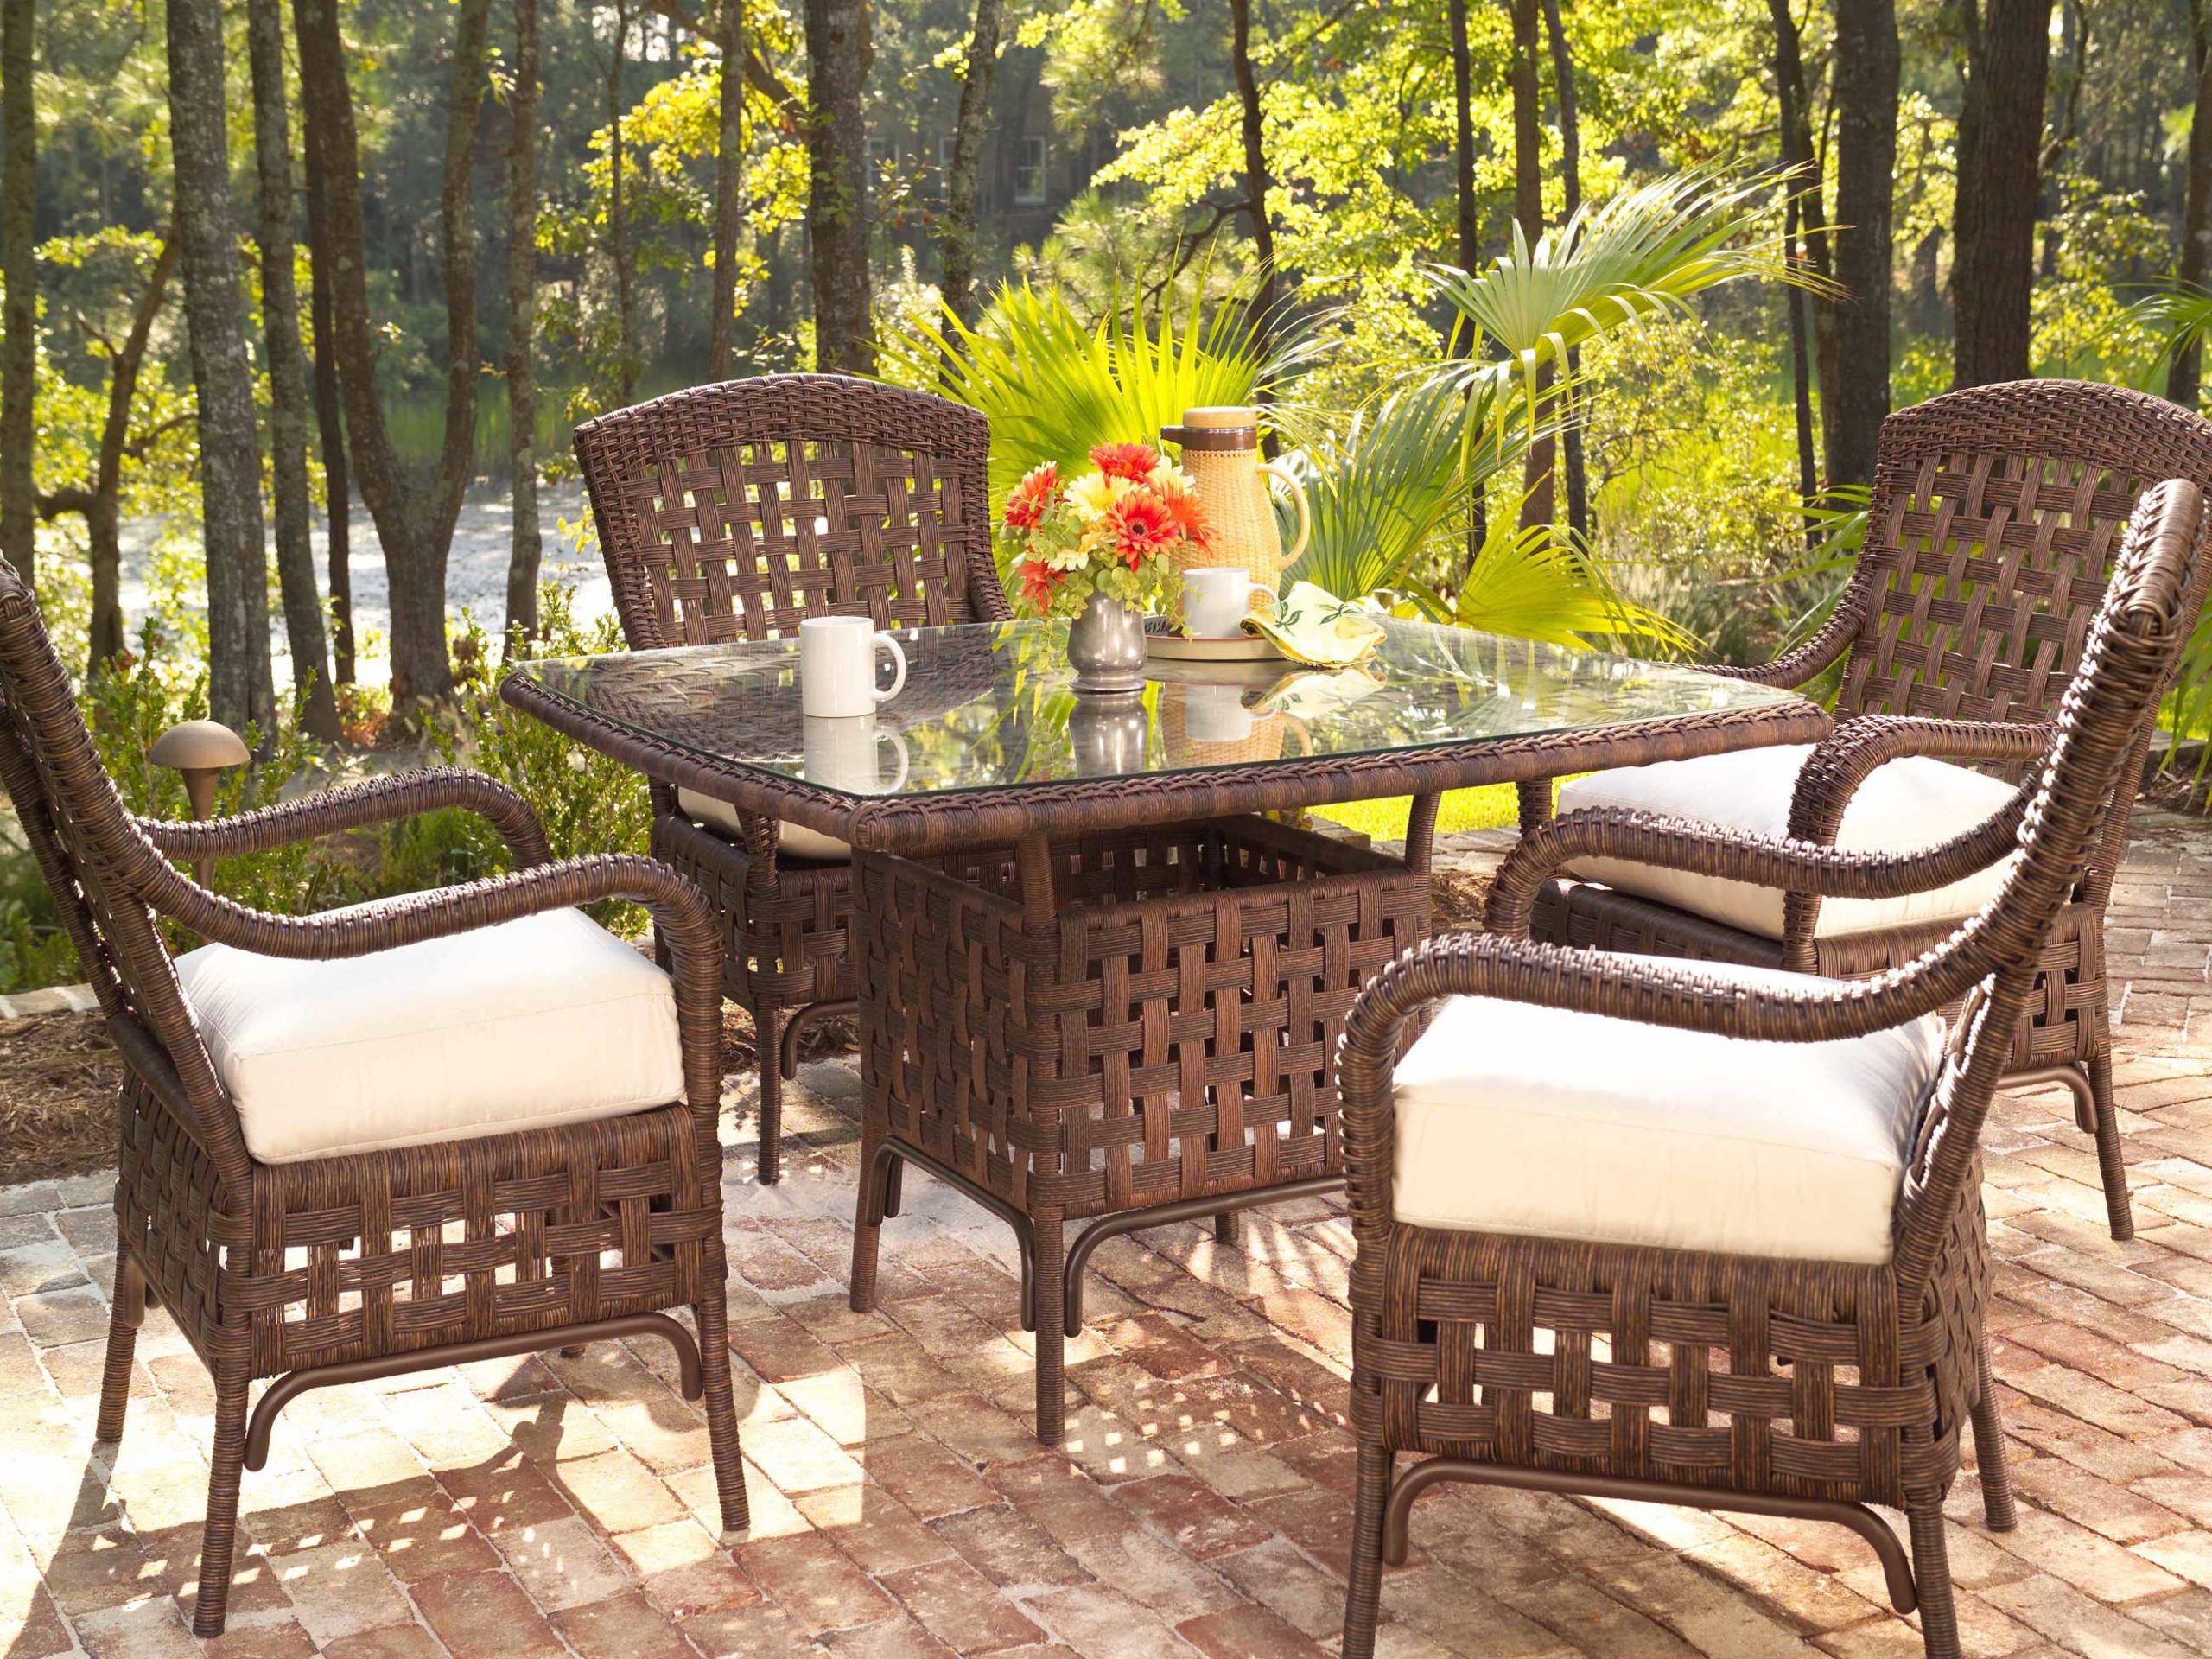 Selecting The Right Furniture Material At Your Outdoors